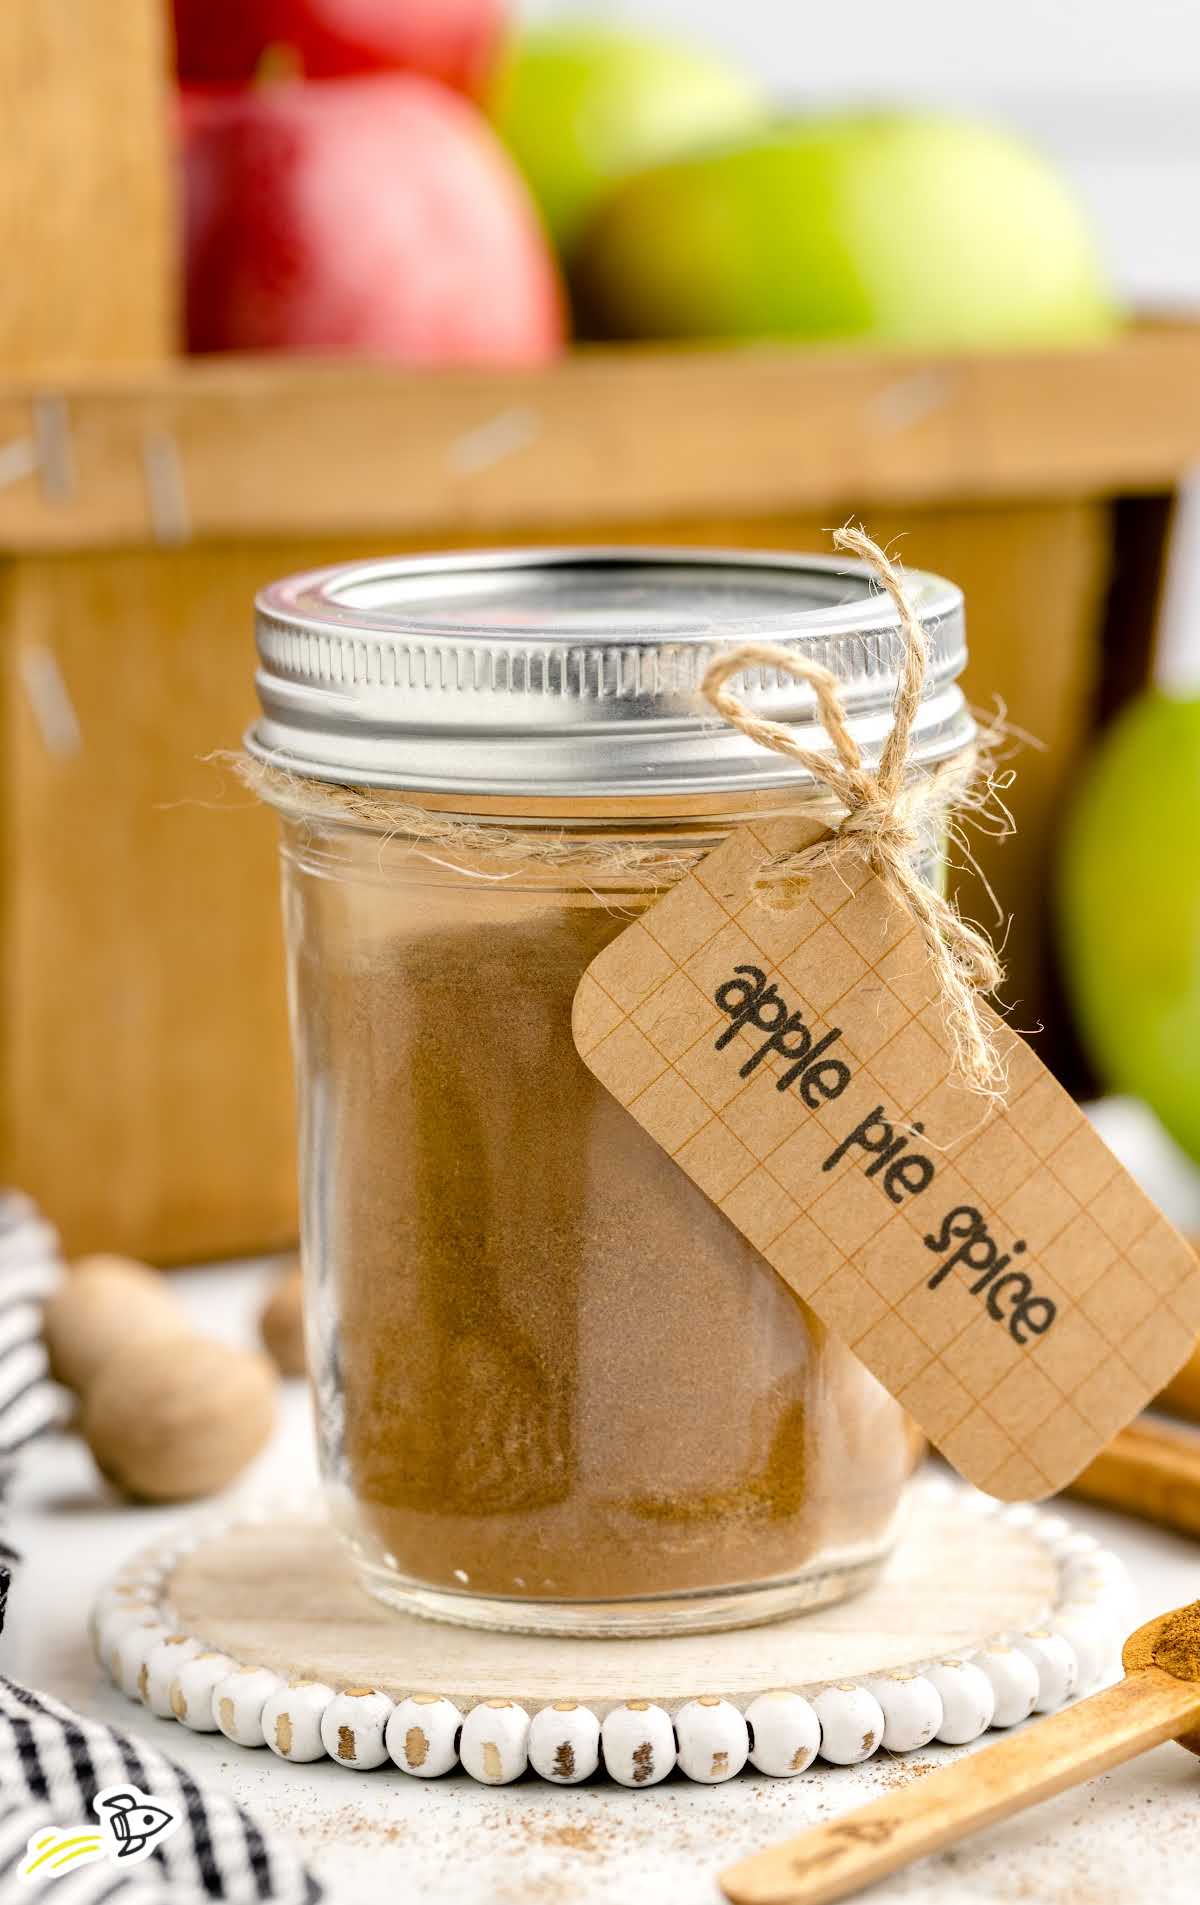 close up shot of a jar of Apple Pie Spice with a spoon with a label